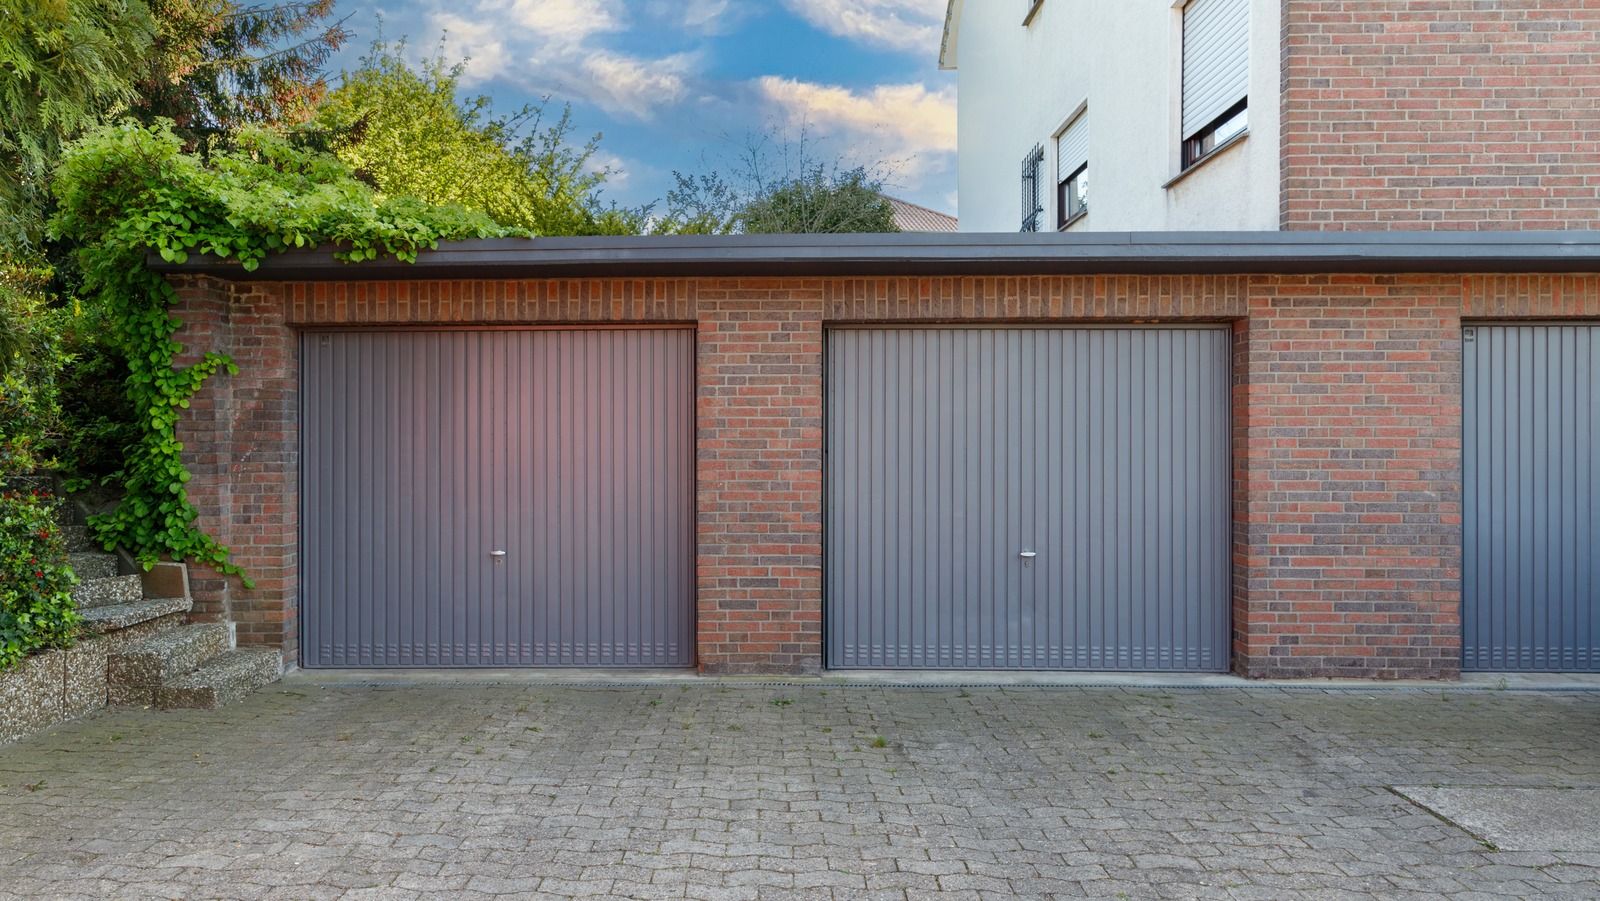 6 Items You Should Never Store in the Garage, According to Pros